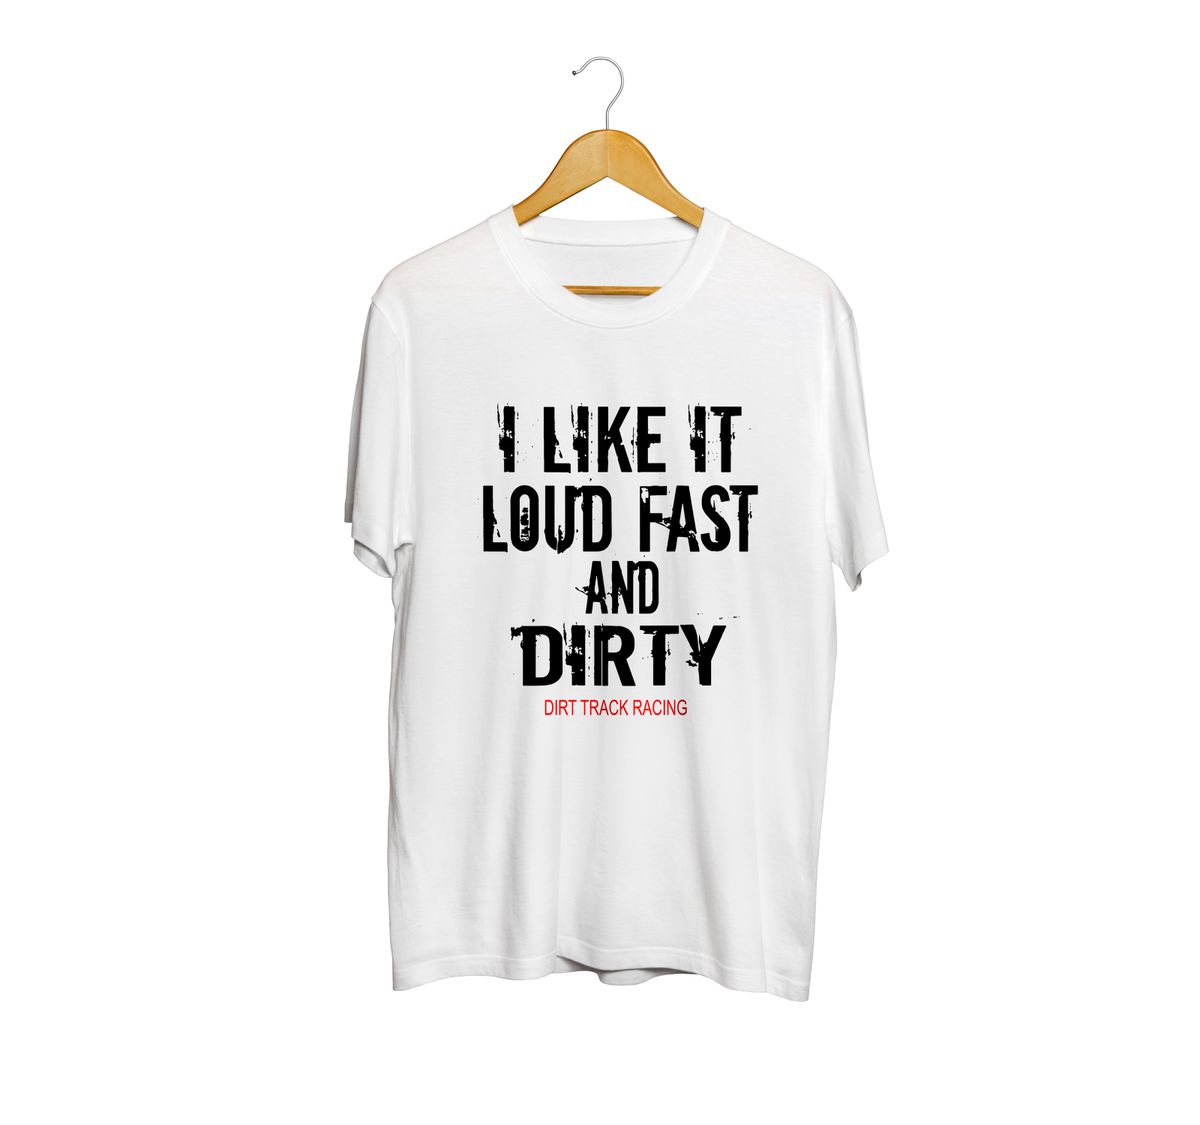 Fan Made Fits Dirt Racing Club White Fast T-Shirt image 1